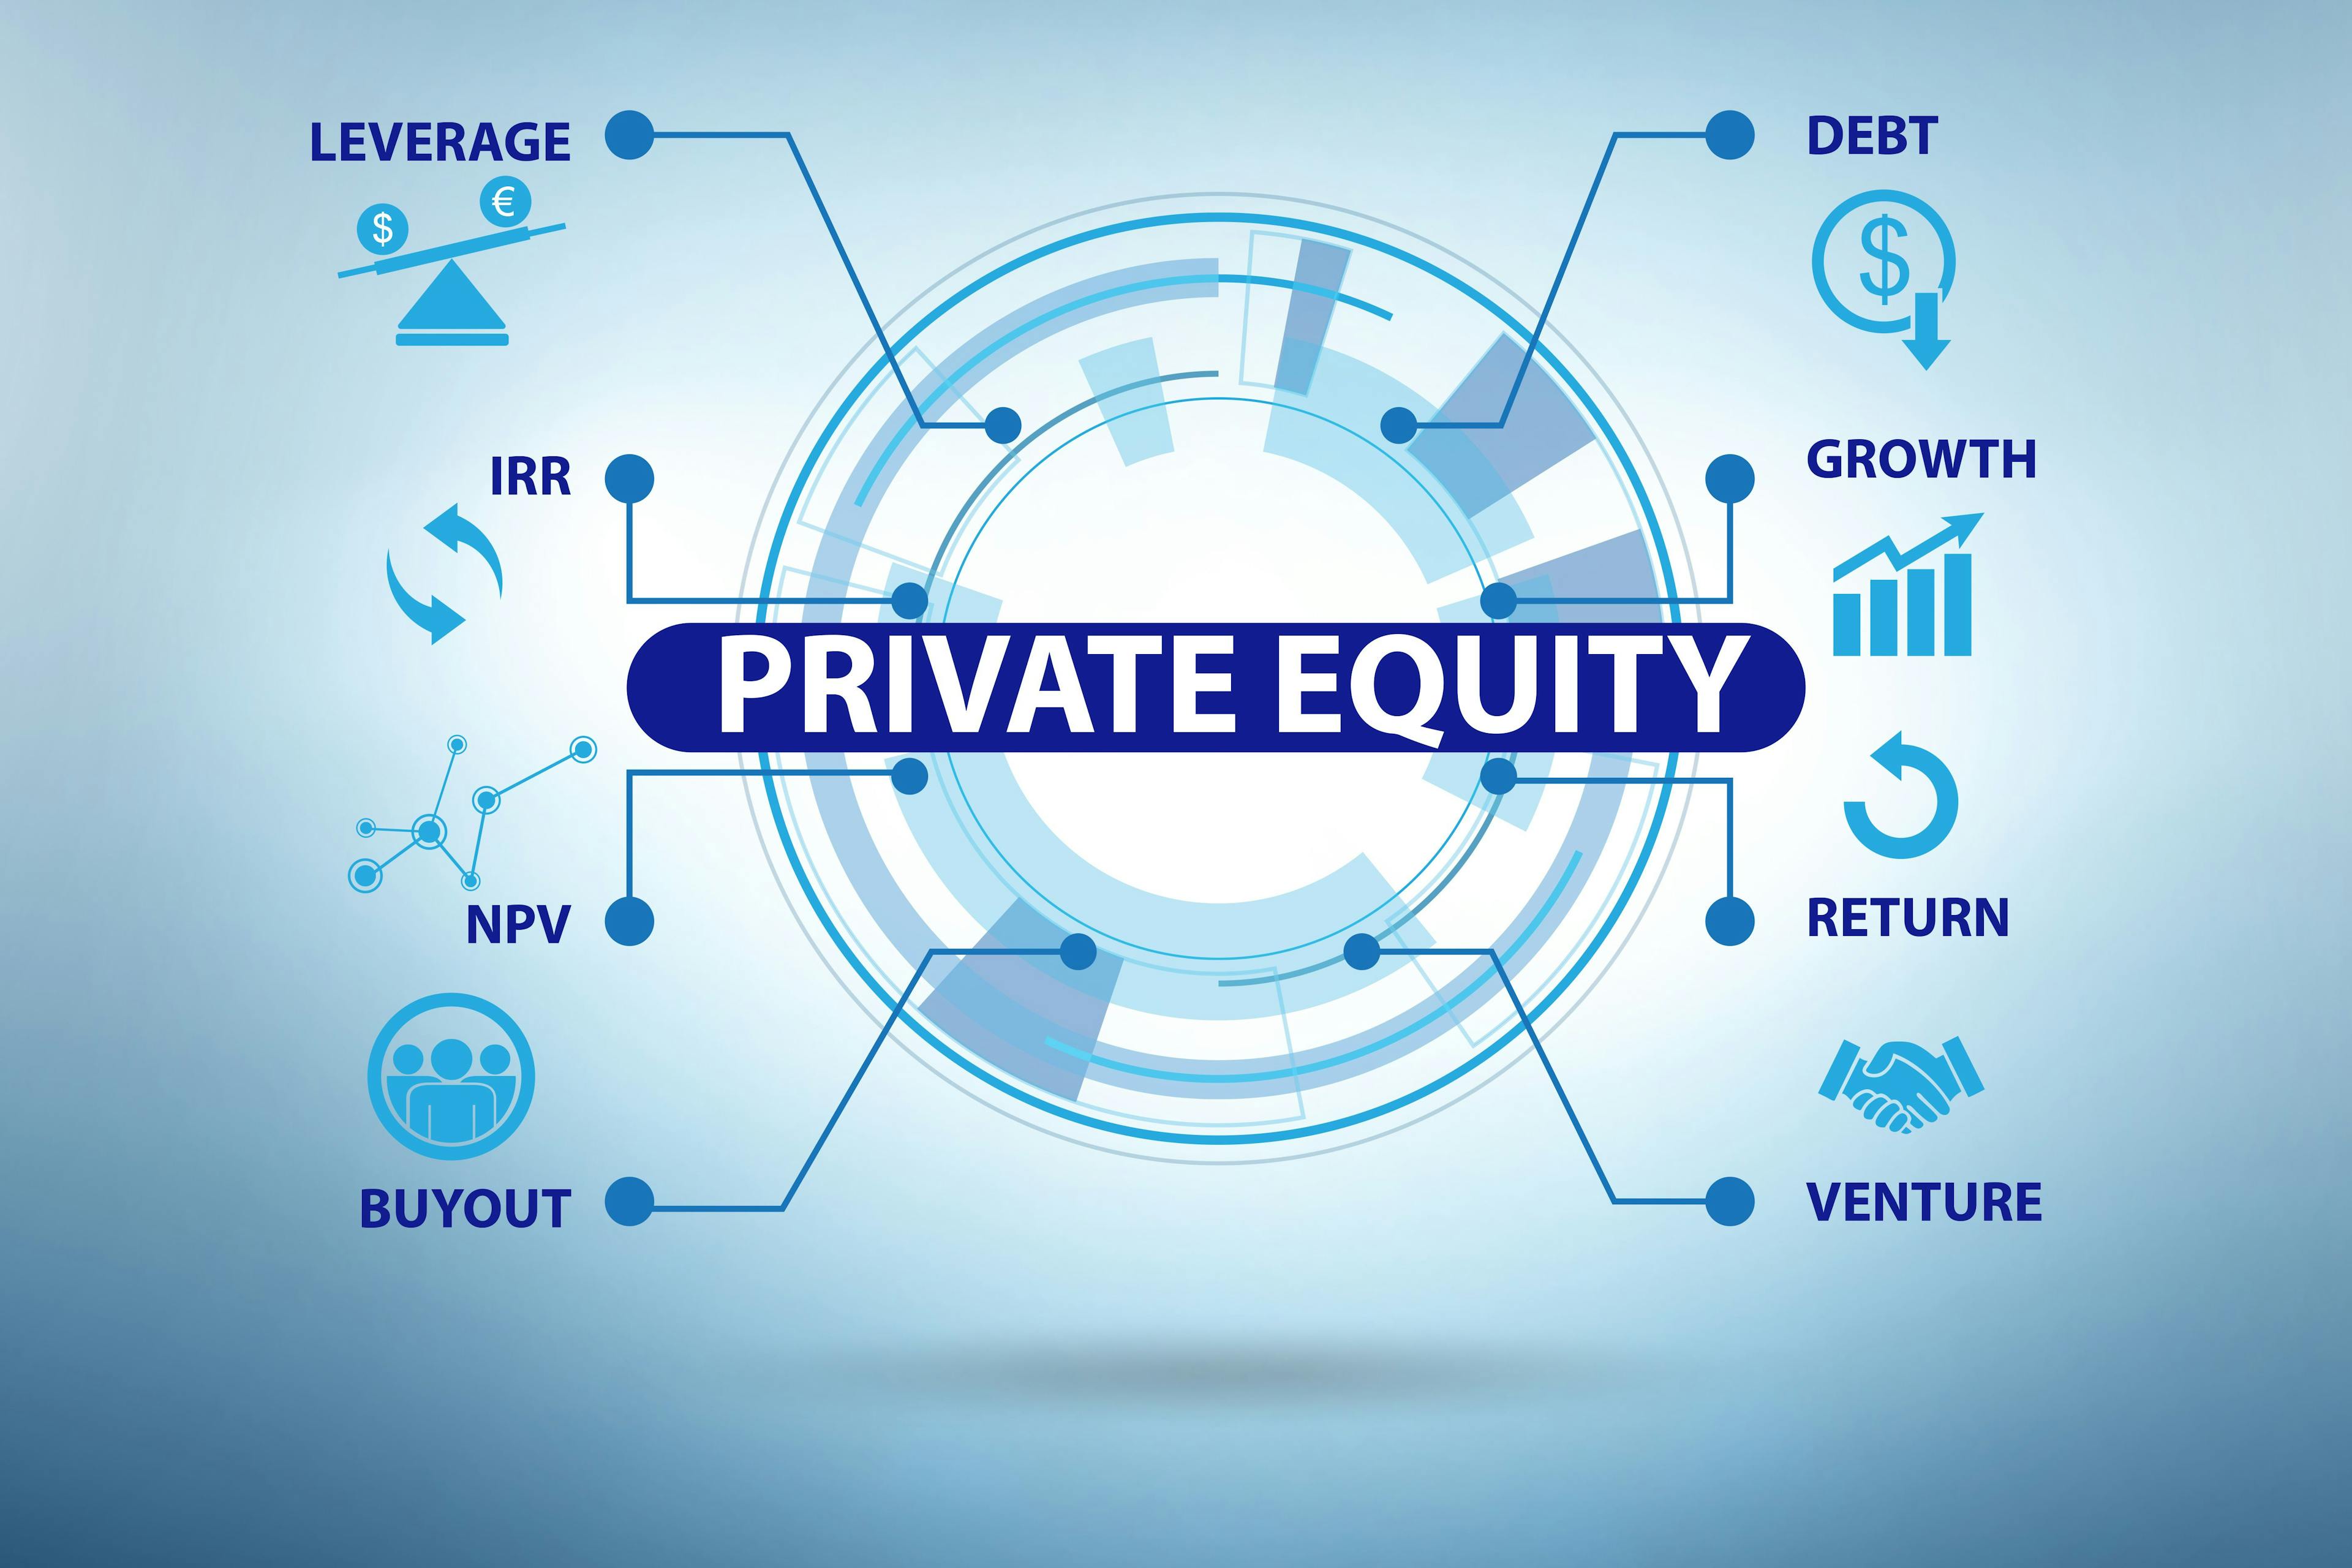 Infographic for private equity | Image credit: @Elnur  stock.adobe.com